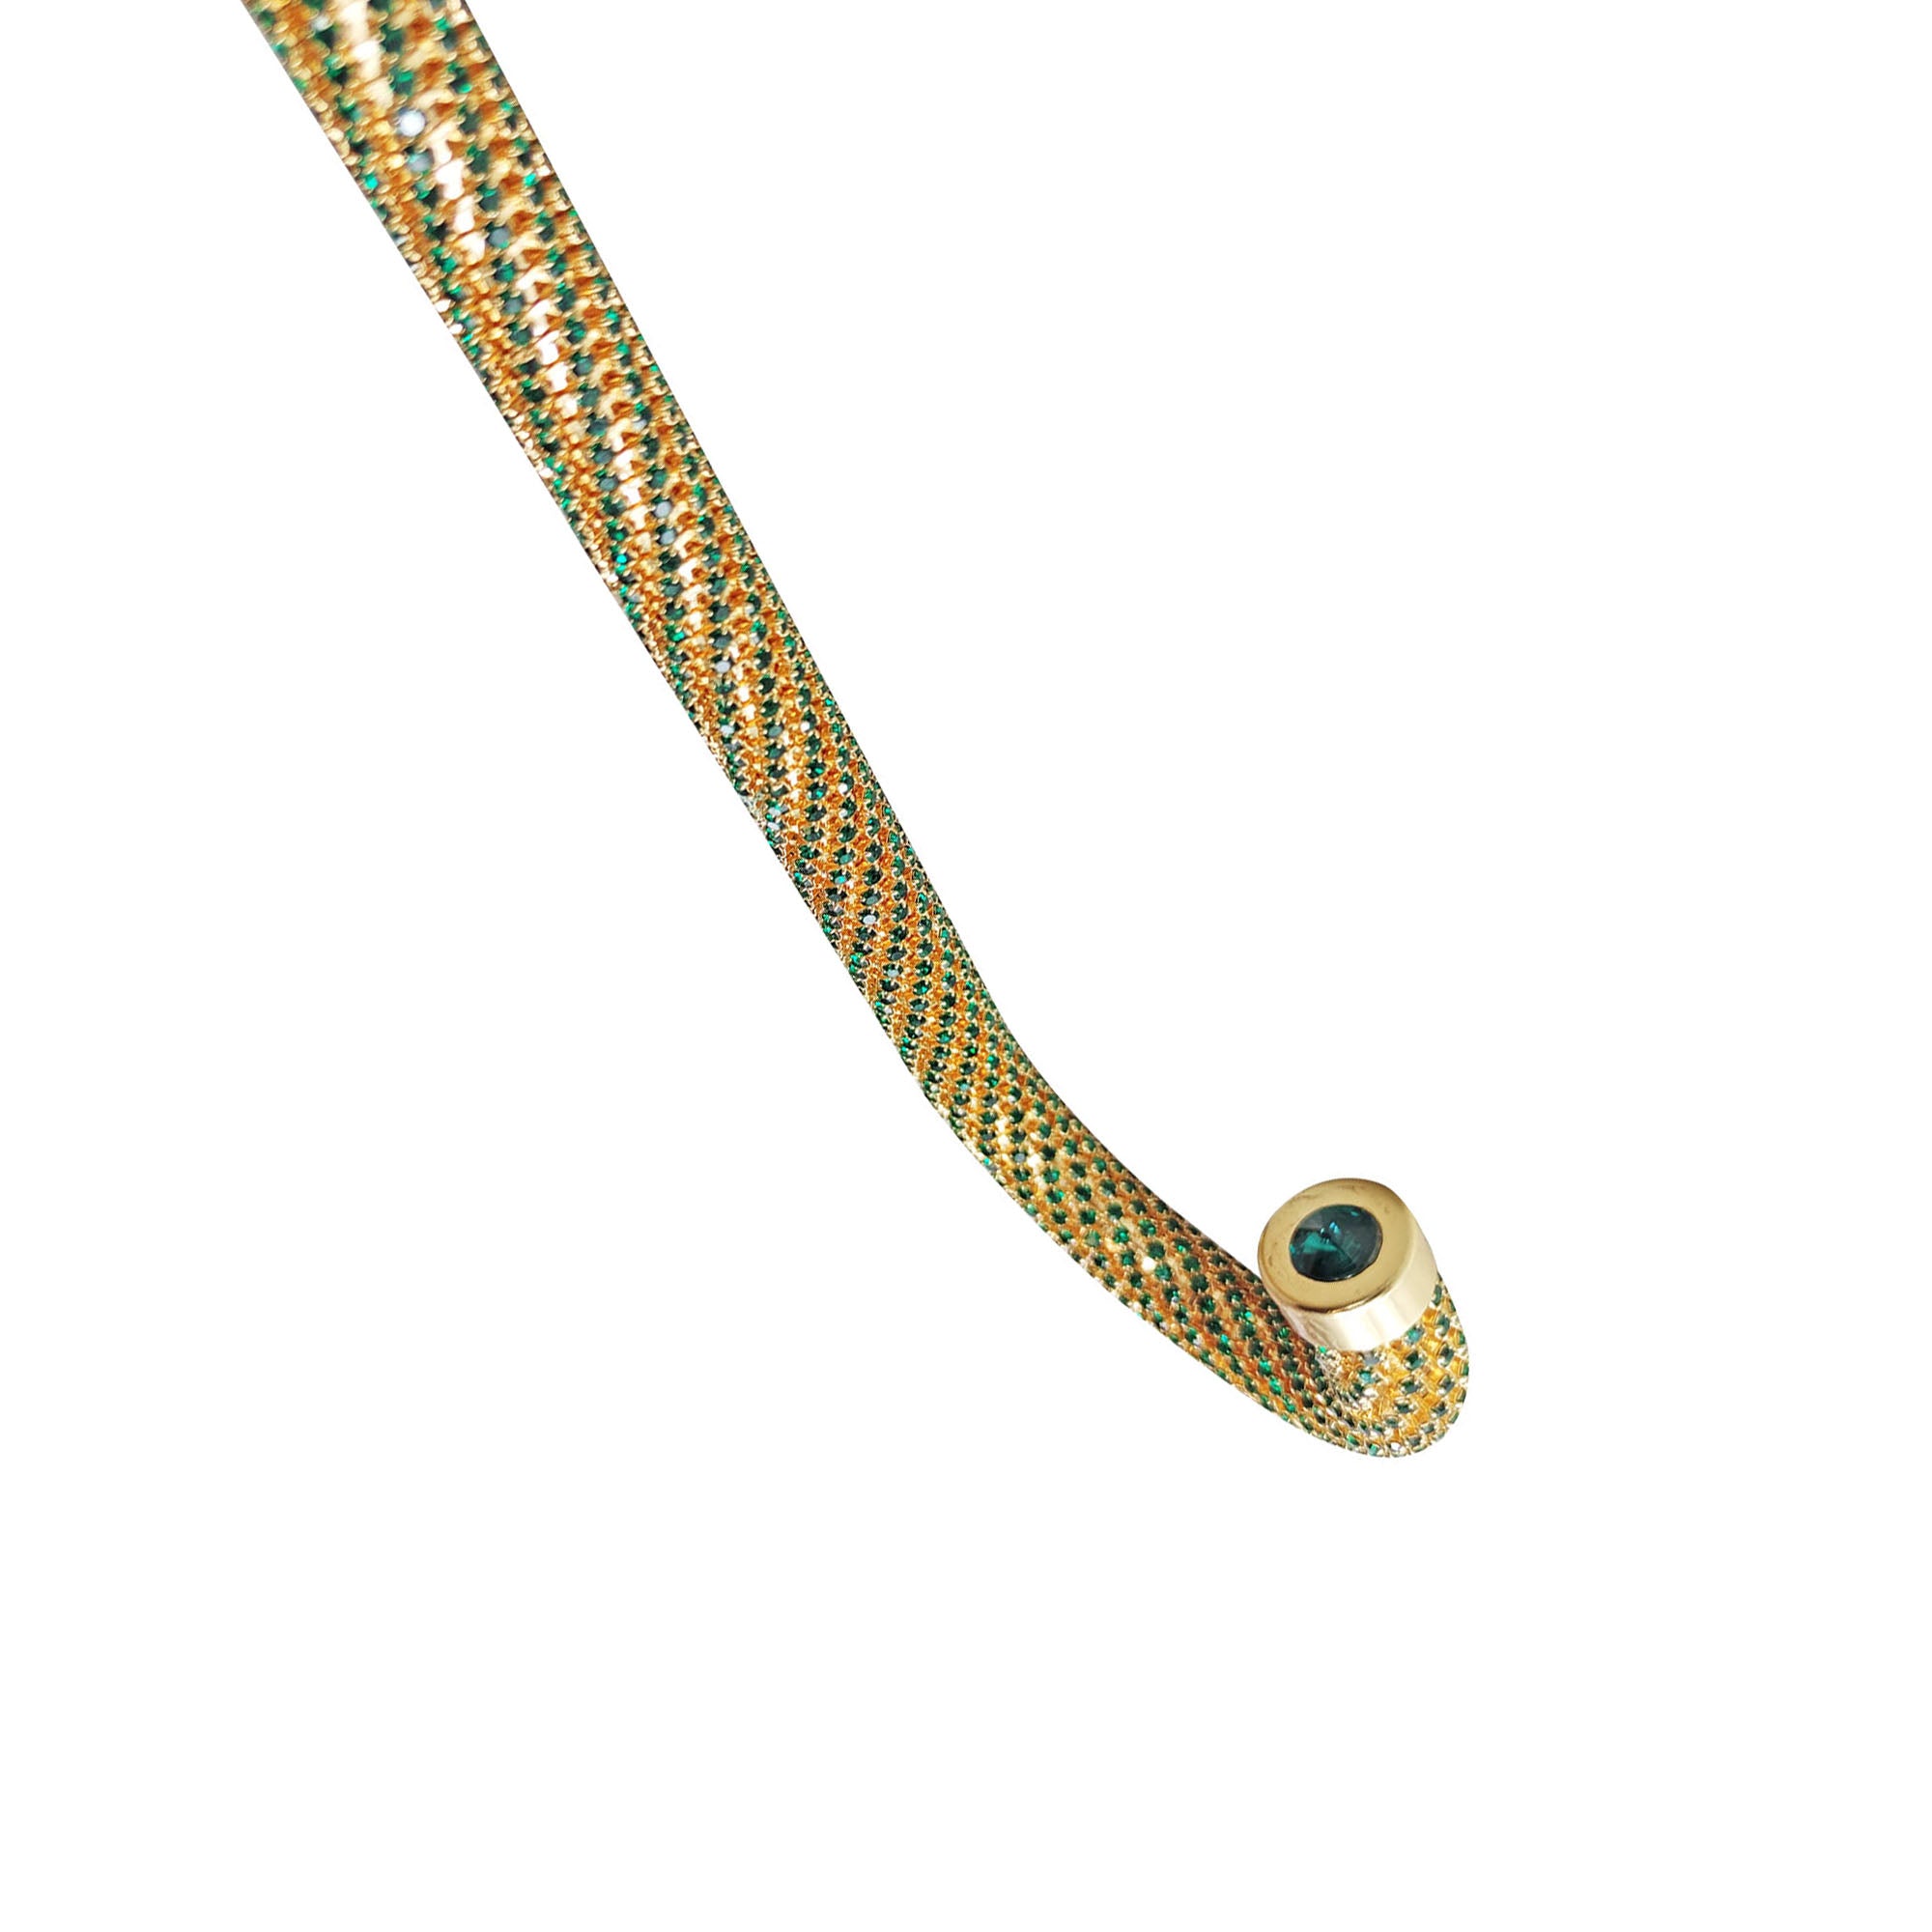 Crook Walking Cane Encrusted with Emerald crystals